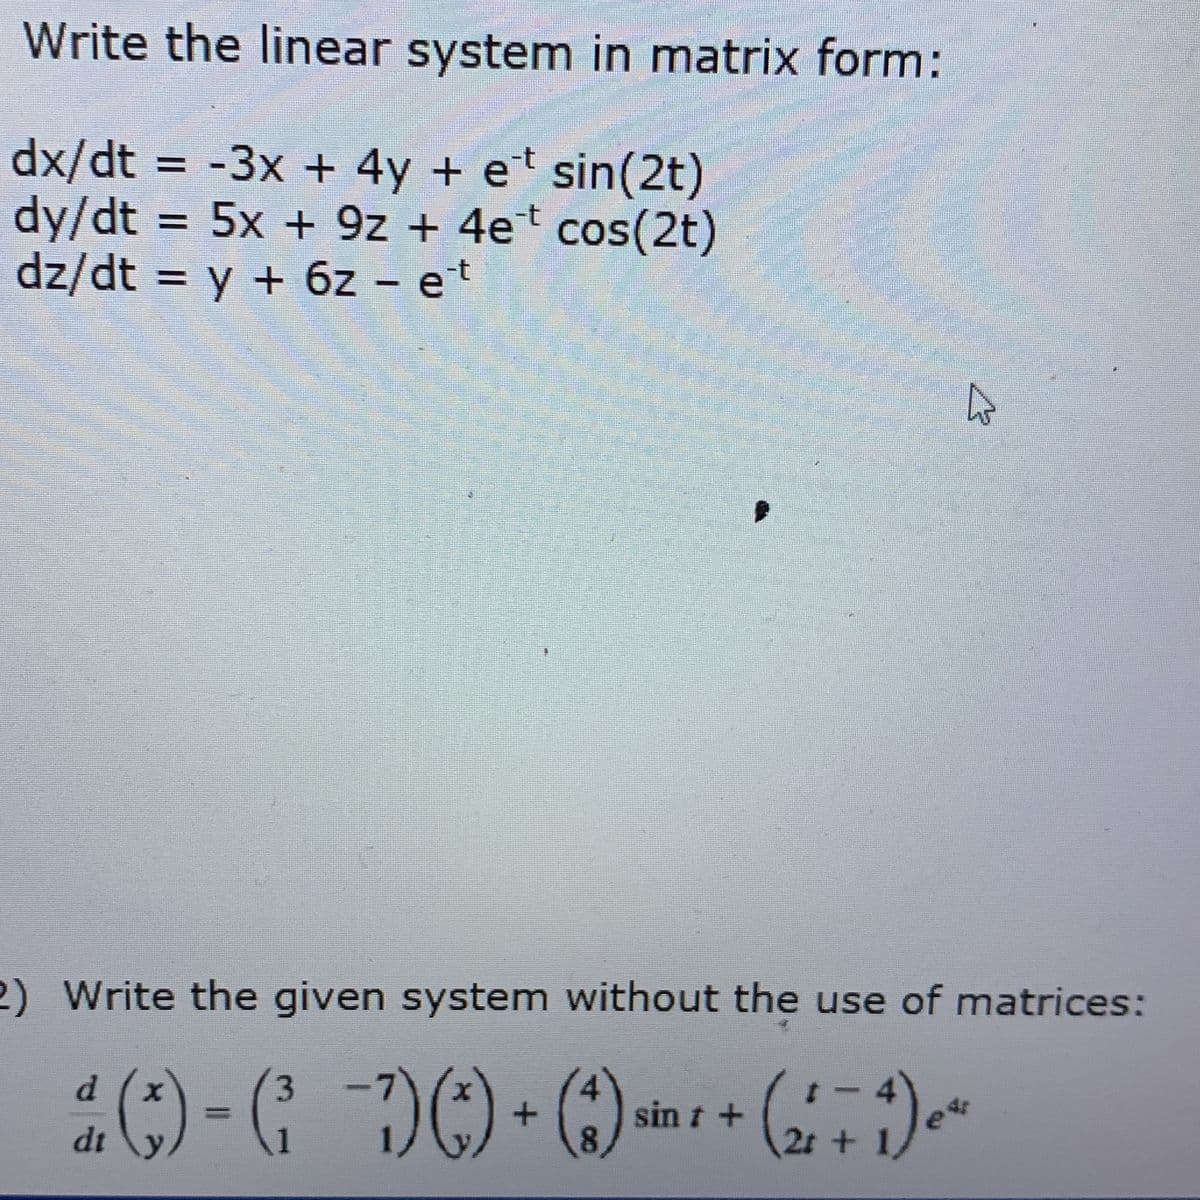 Write the linear system in matrix form:
dx/dt = -3x + 4y + et sin(2t)
dy/dt = 5x + 9z + 4e* cos(2t)
dz/dt = y + 6z - et
2) Write the given system without the use of matrices:
3.
dt
sin t +
8.
2t +
1
